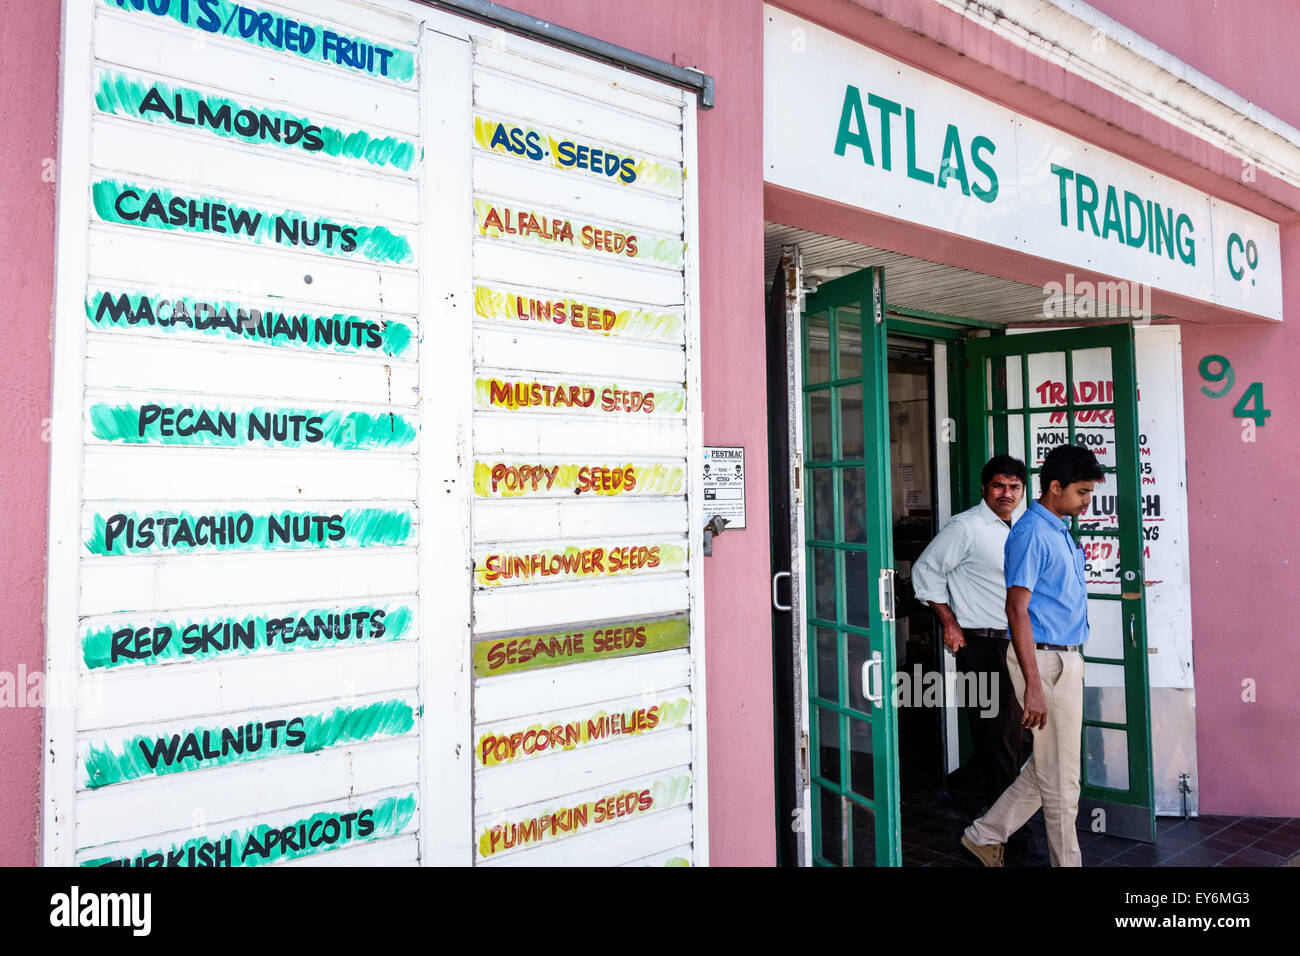 Cape Town South Africa,Bo-Kaap,Schotsche Kloof,Malay Quarter,Wale Street,Muslim,Atlas Trading Company,Indian spice shop,front,entrance,shopping shoppe Stock Photo